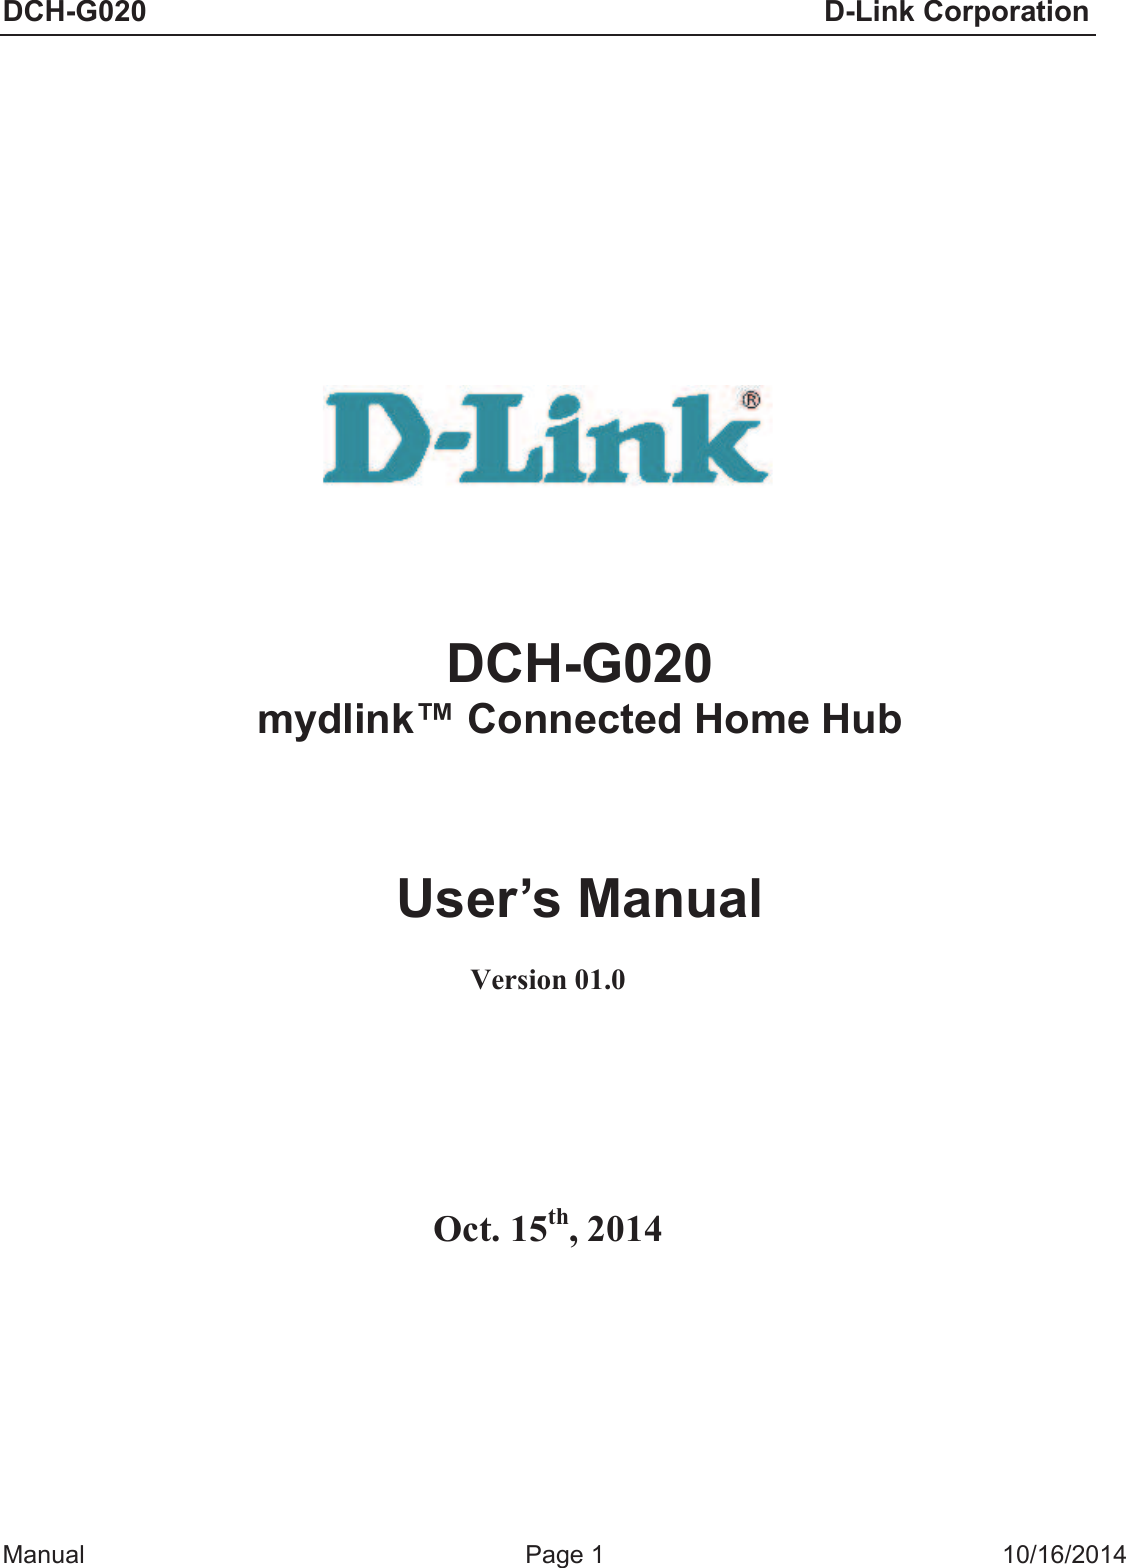 DCH-G020                            D-Link Corporation  Manual  Page 1  10/16/2014                   DCH-G020  mydlink™ Connected Home Hub   User’s Manual  Version 01.0     Oct. 15th, 2014        